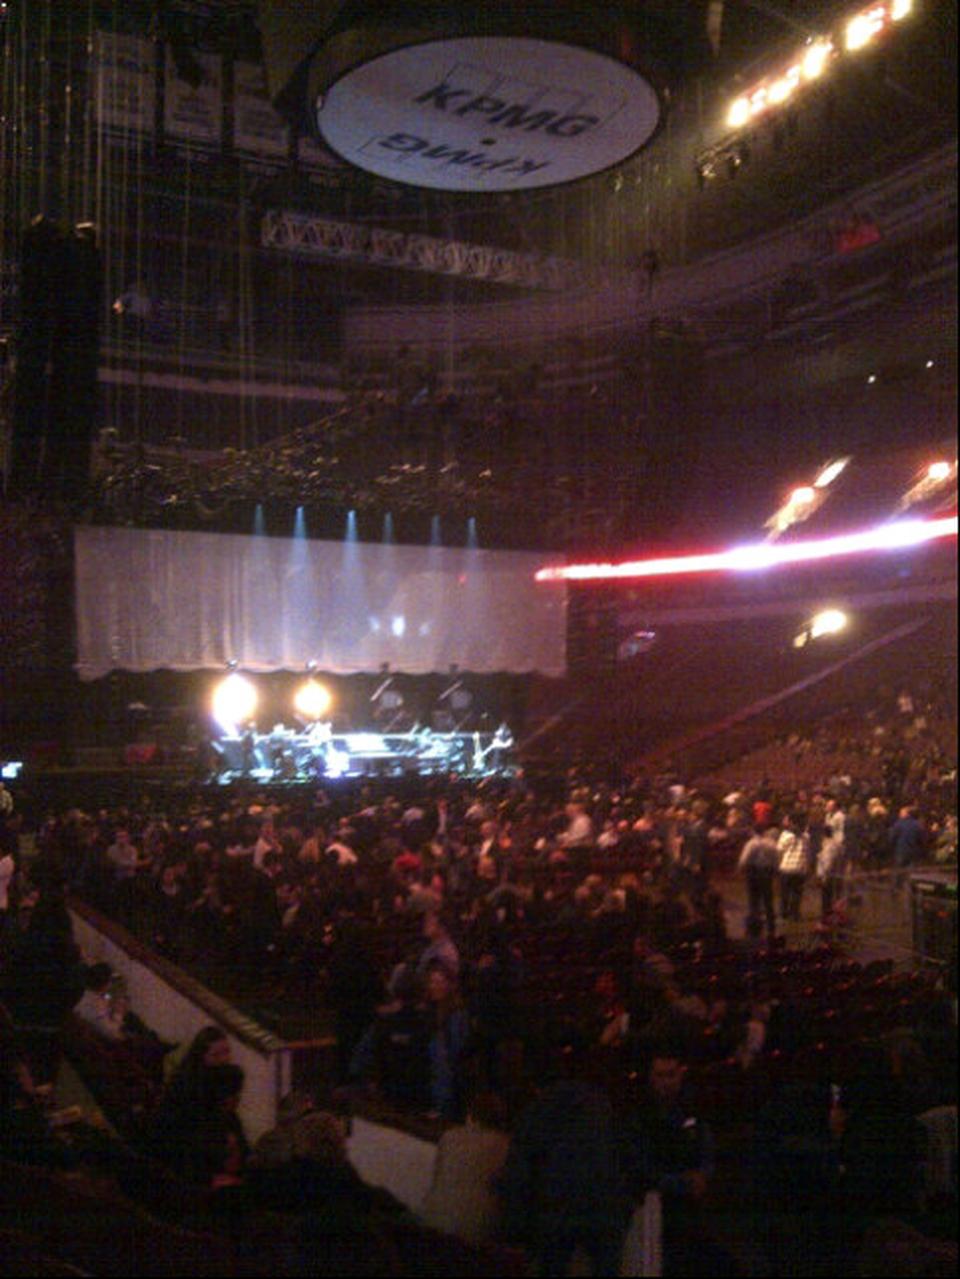 section 114, row 5 seat view  for concert - rogers arena